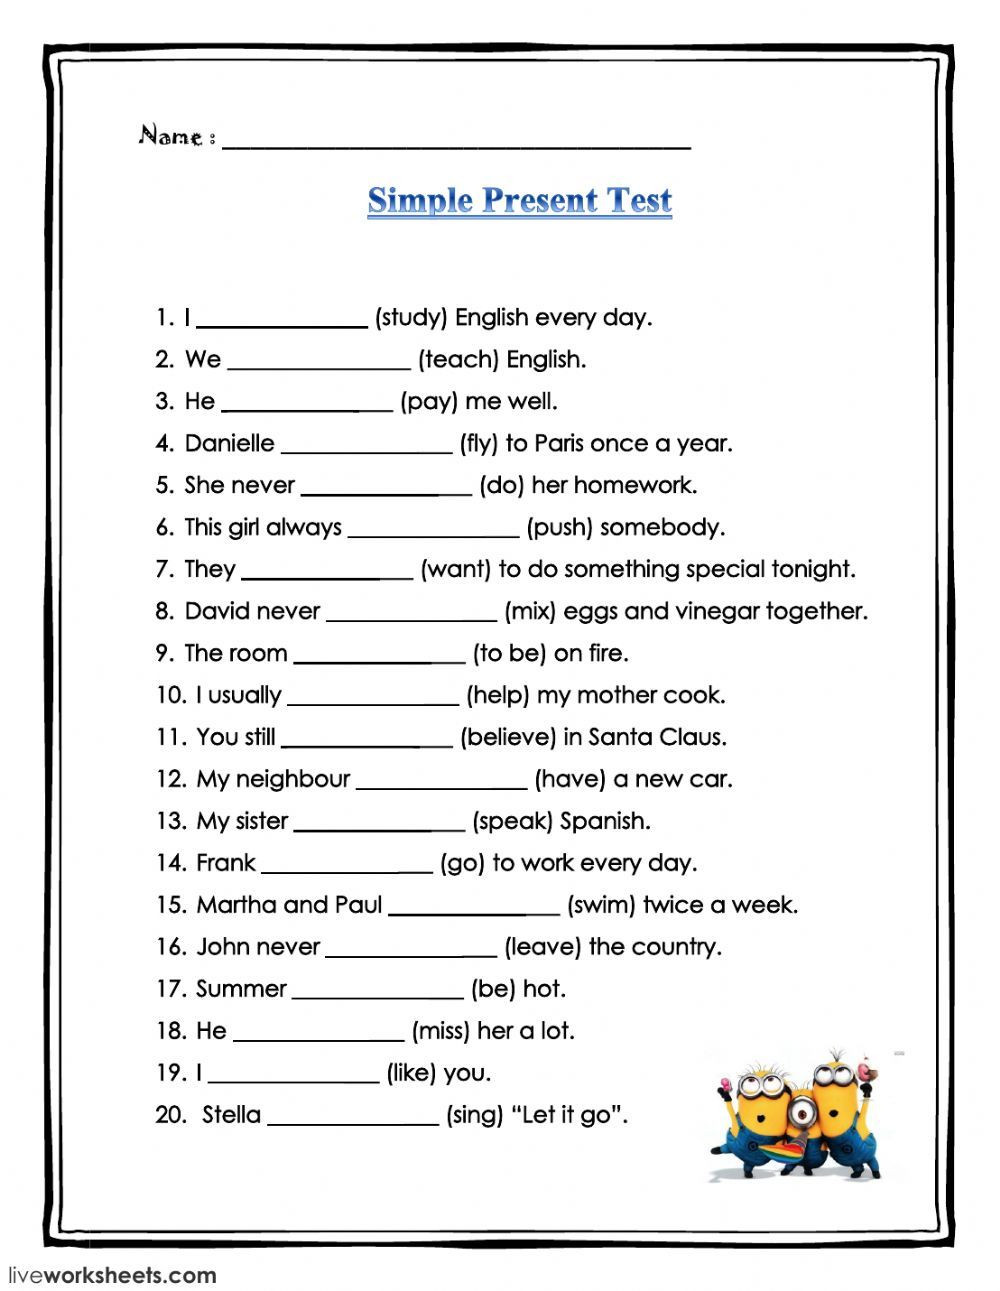 Relative Dating Worksheet Answer Key Present Simple Interactive and Able Worksheet You